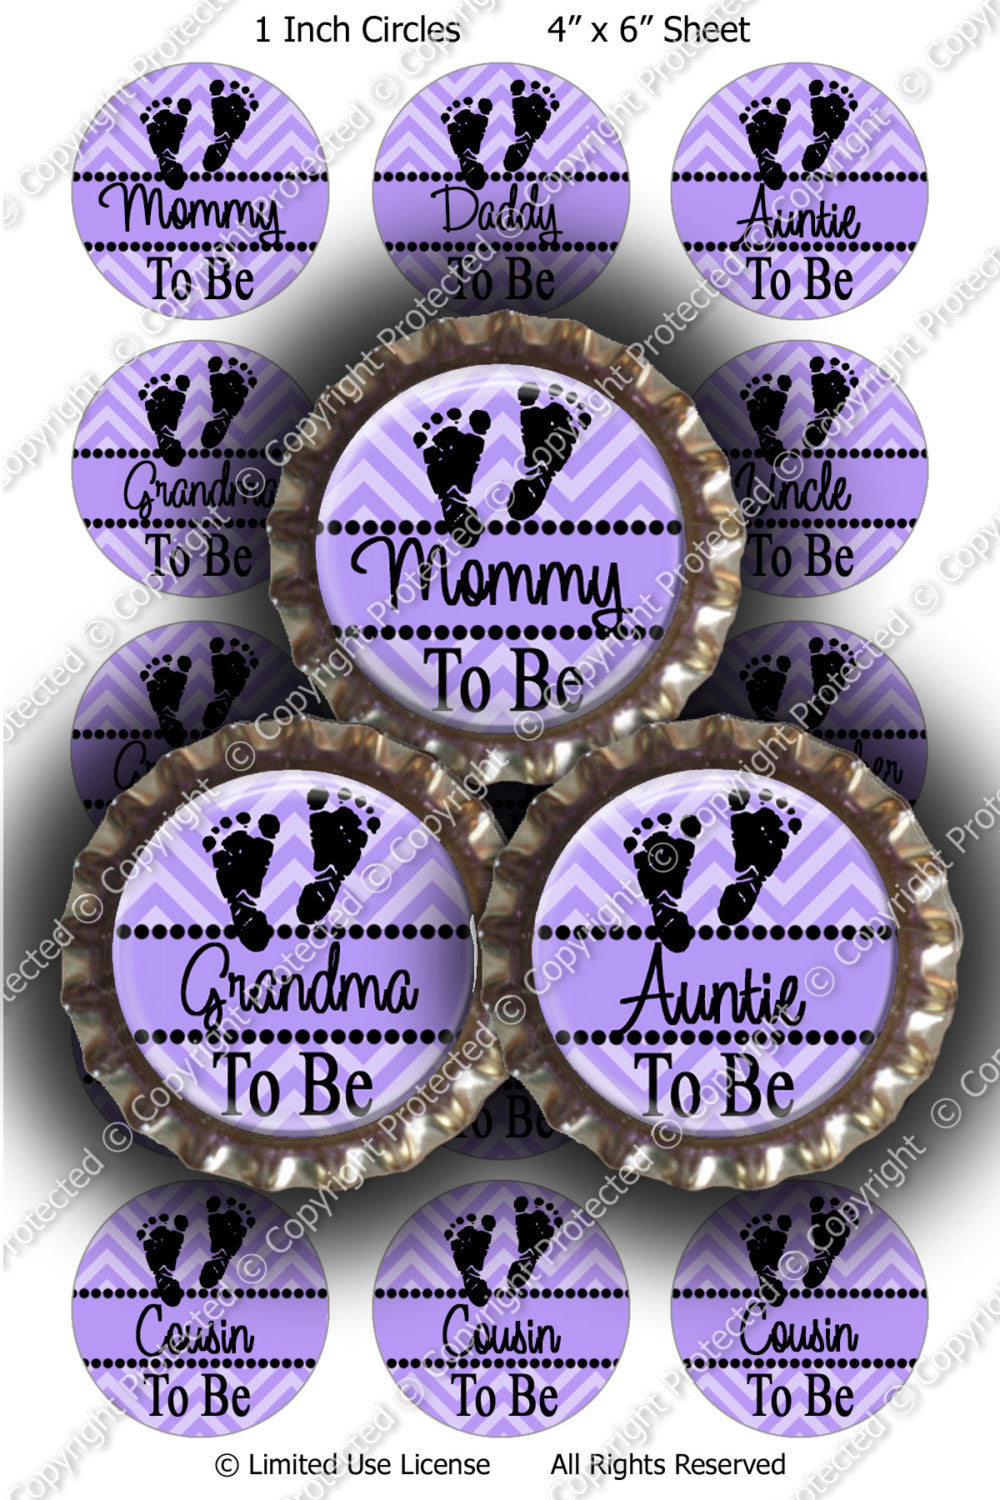 Digital Bottle Cap Images - Chevron Baby To Be Lavender (ETR140) 1 Inch Circles for Bottlecaps, Magnets, Jewelry, Hairbows, Buttons